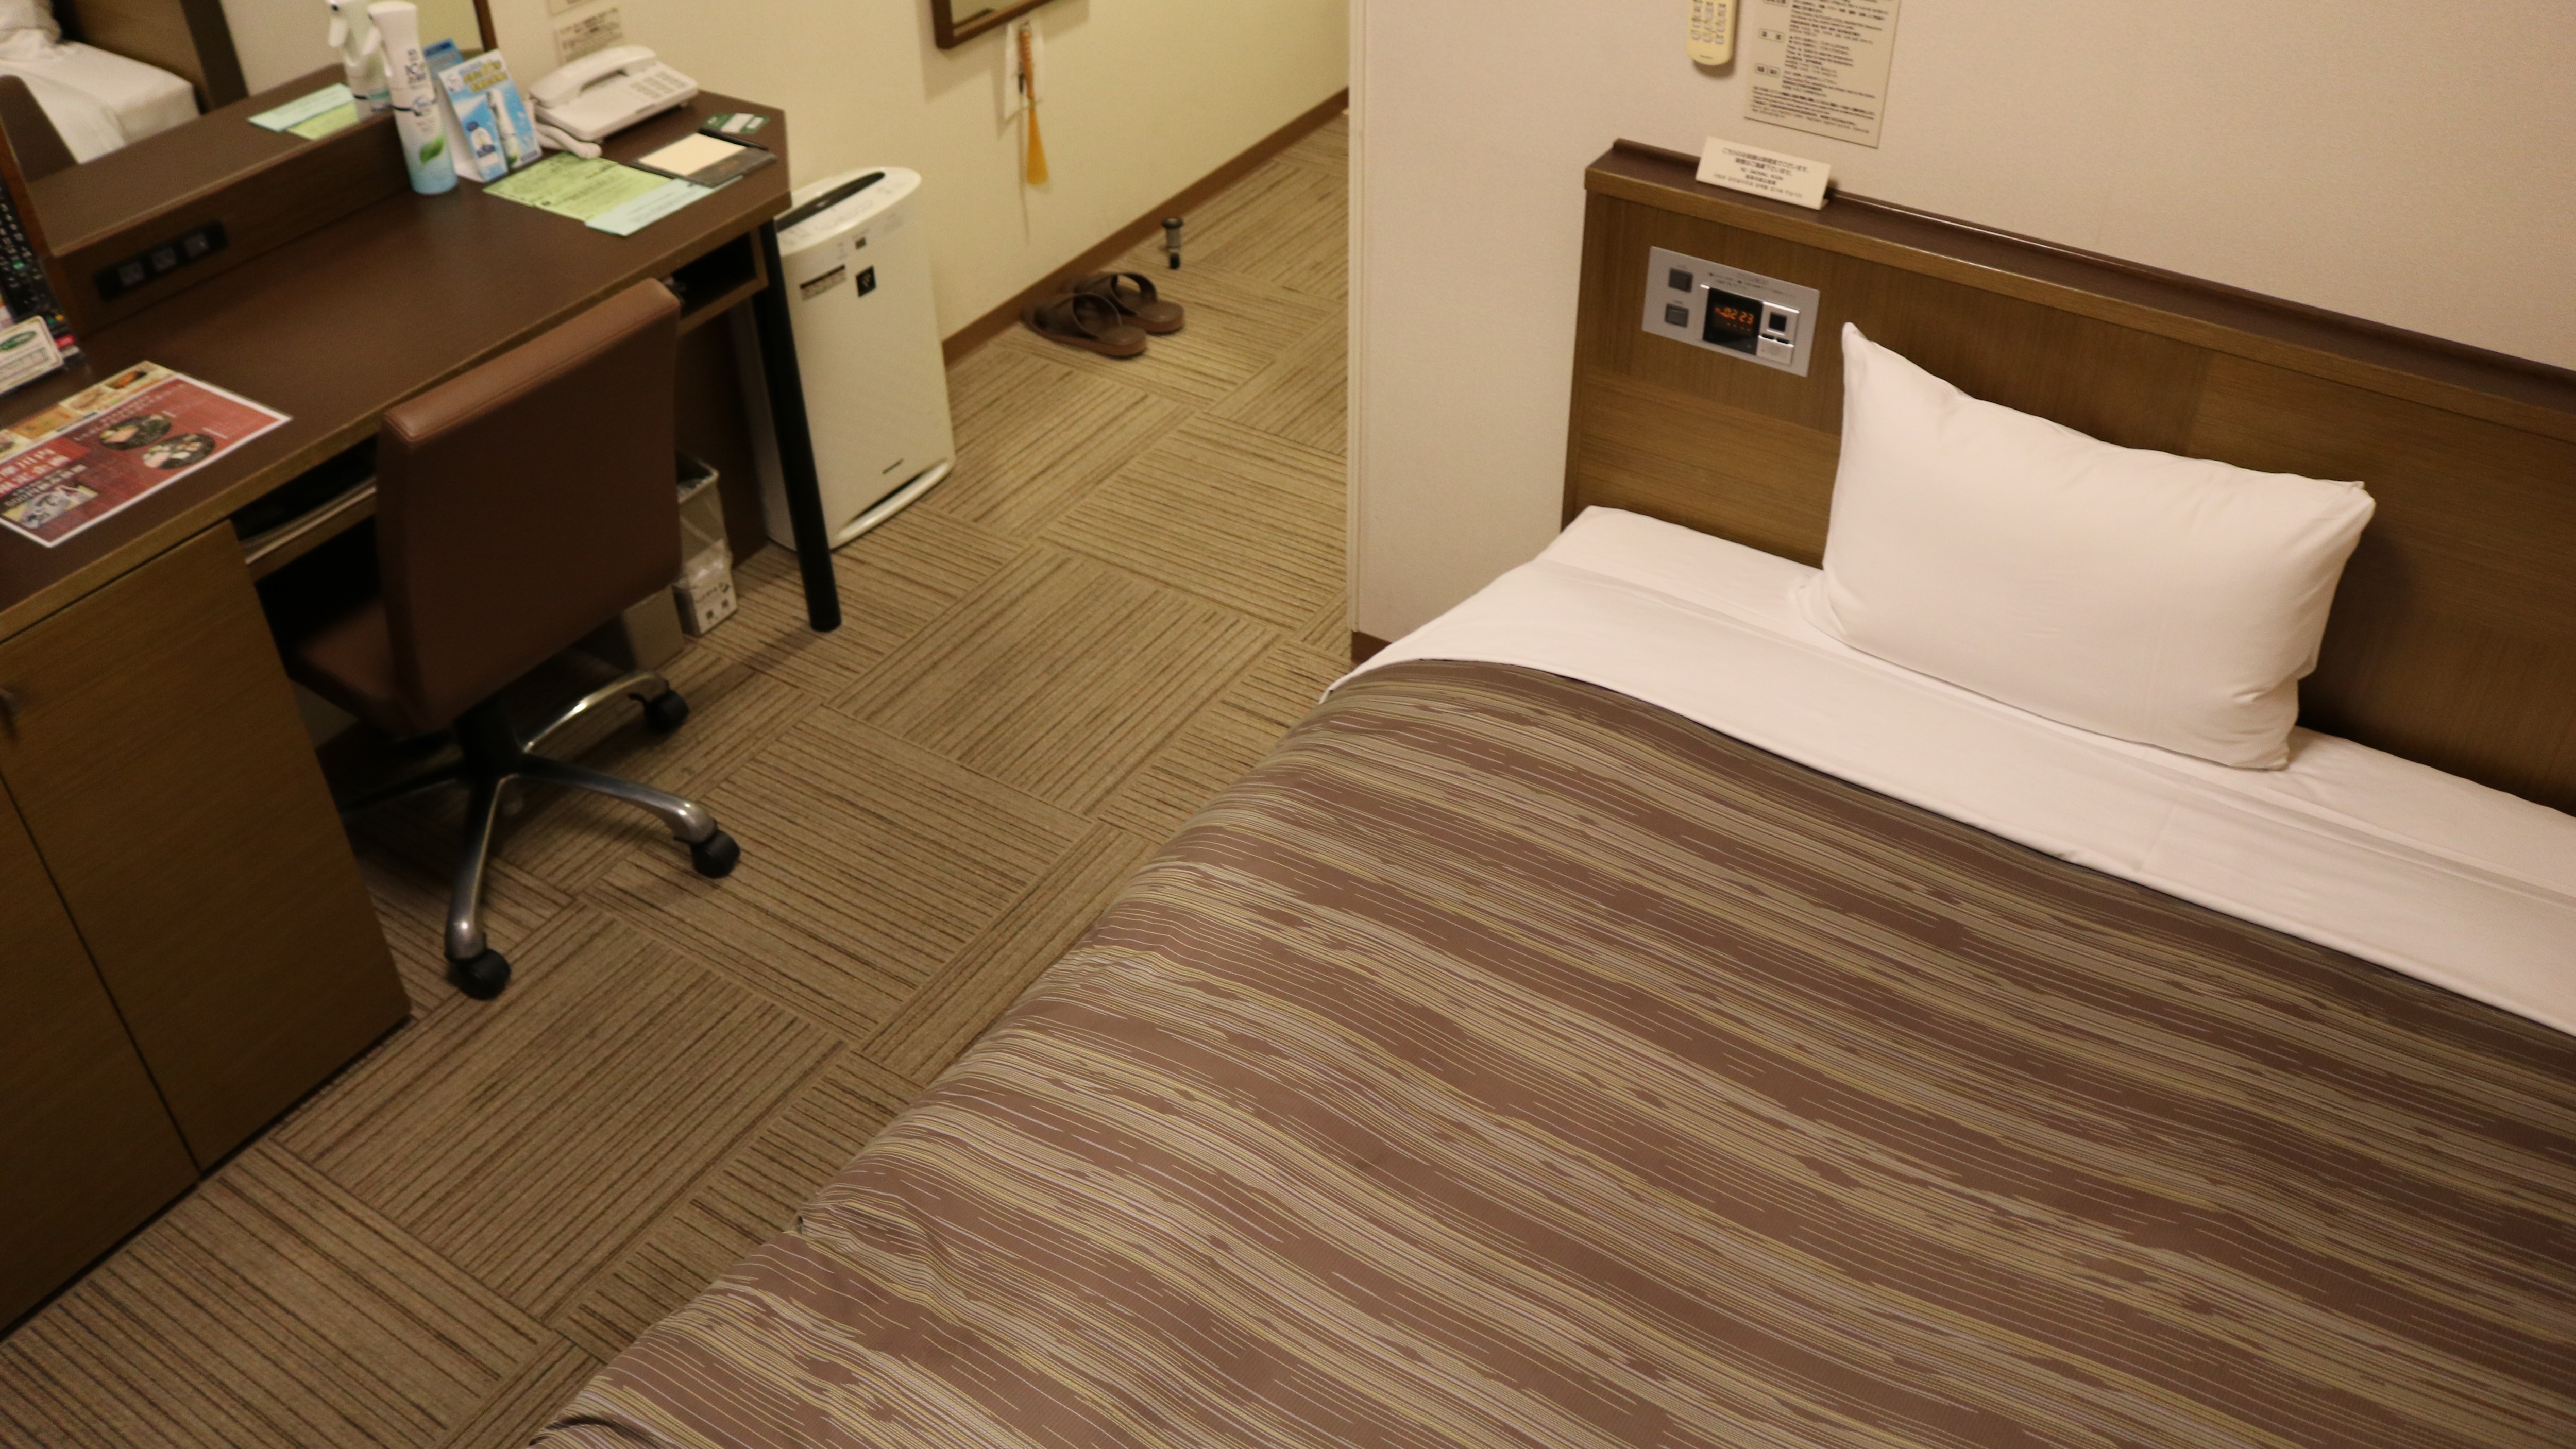 Standard single [Bed size 140 & times; 196 (cm)] All rooms are equipped with Wi-fi.